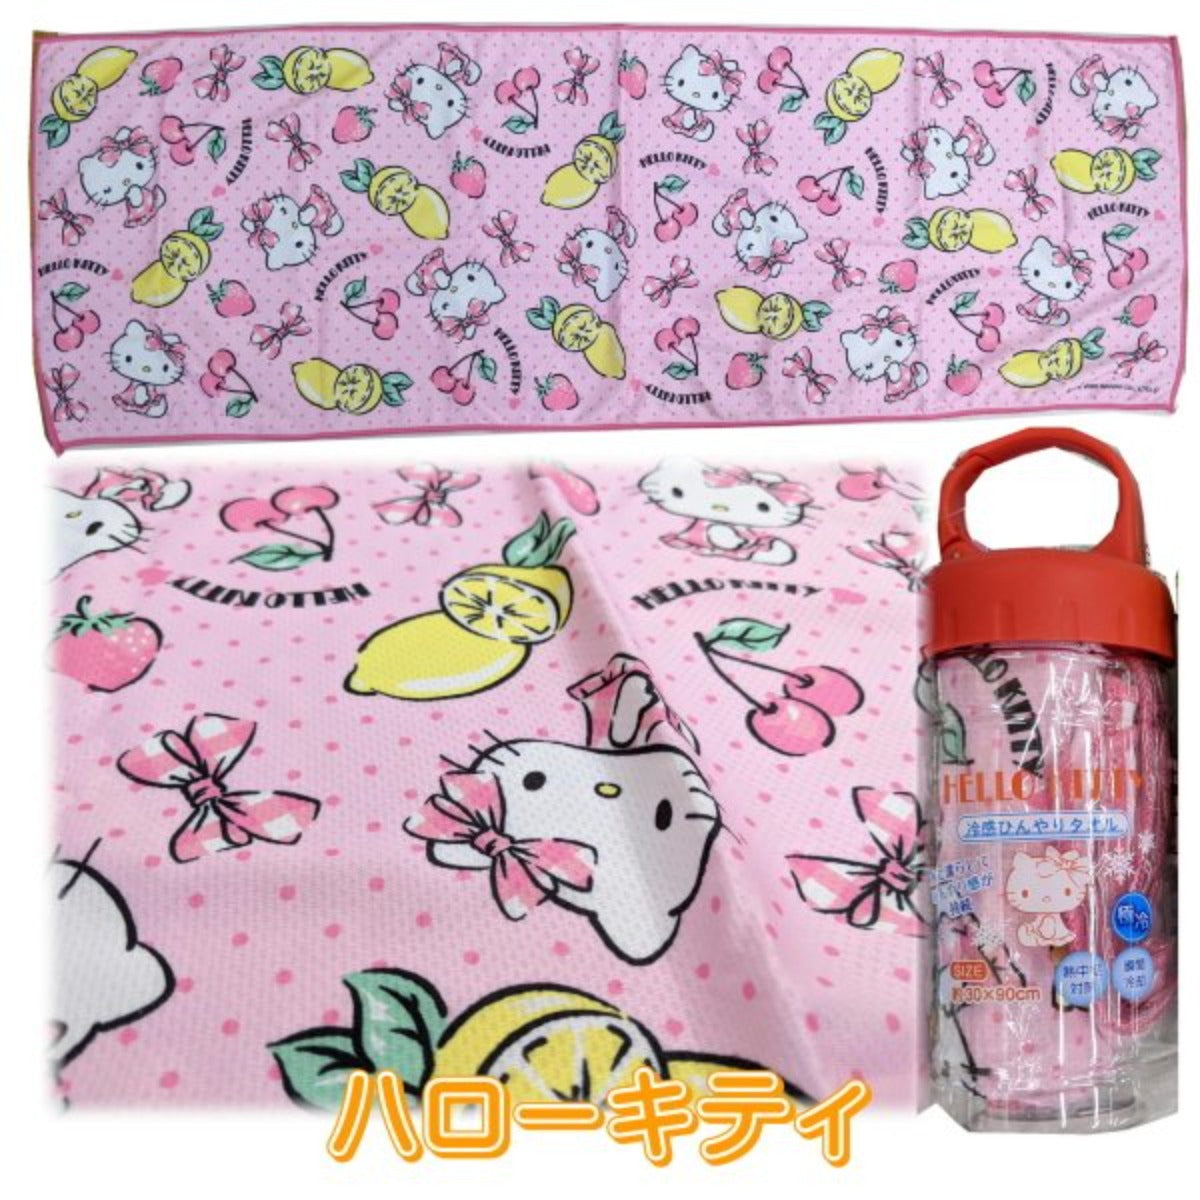 Hello Kitty Cool Towel in Bottle SB Red